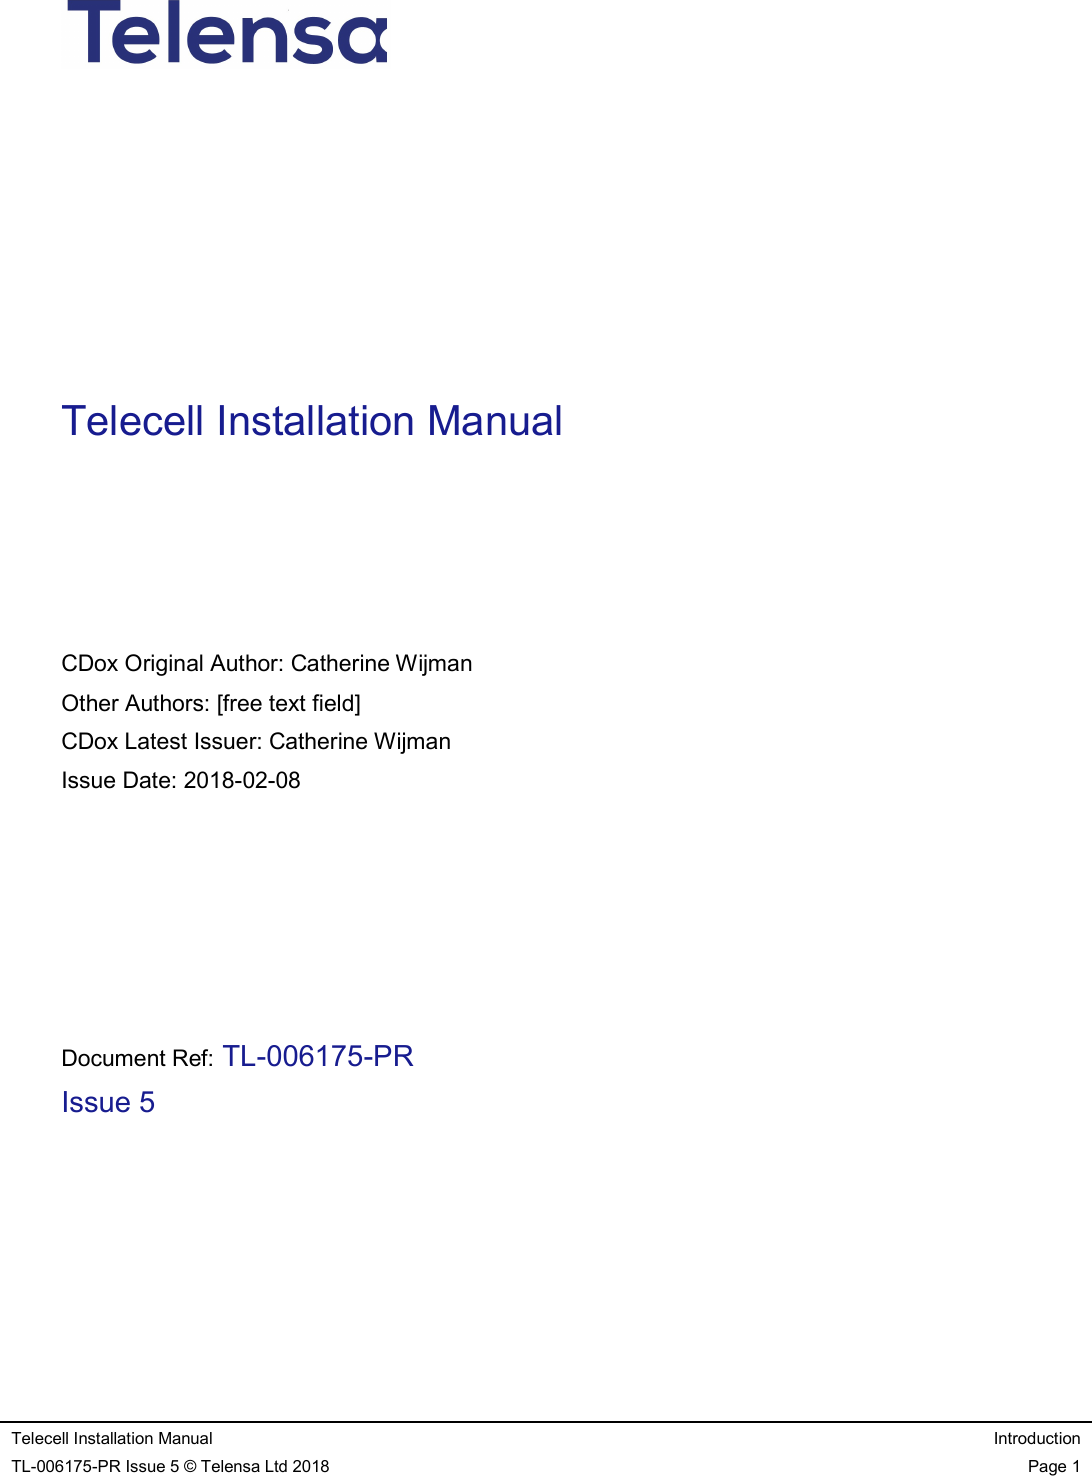    Telecell Installation Manual  Introduction TL-006175-PR Issue 5 © Telensa Ltd 2018  Page 1                                   Telecell Installation Manual       CDox Original Author: Catherine Wijman Other Authors: [free text field] CDox Latest Issuer: Catherine Wijman Issue Date: 2018-02-08       Document Ref: TL-006175-PR Issue 5    